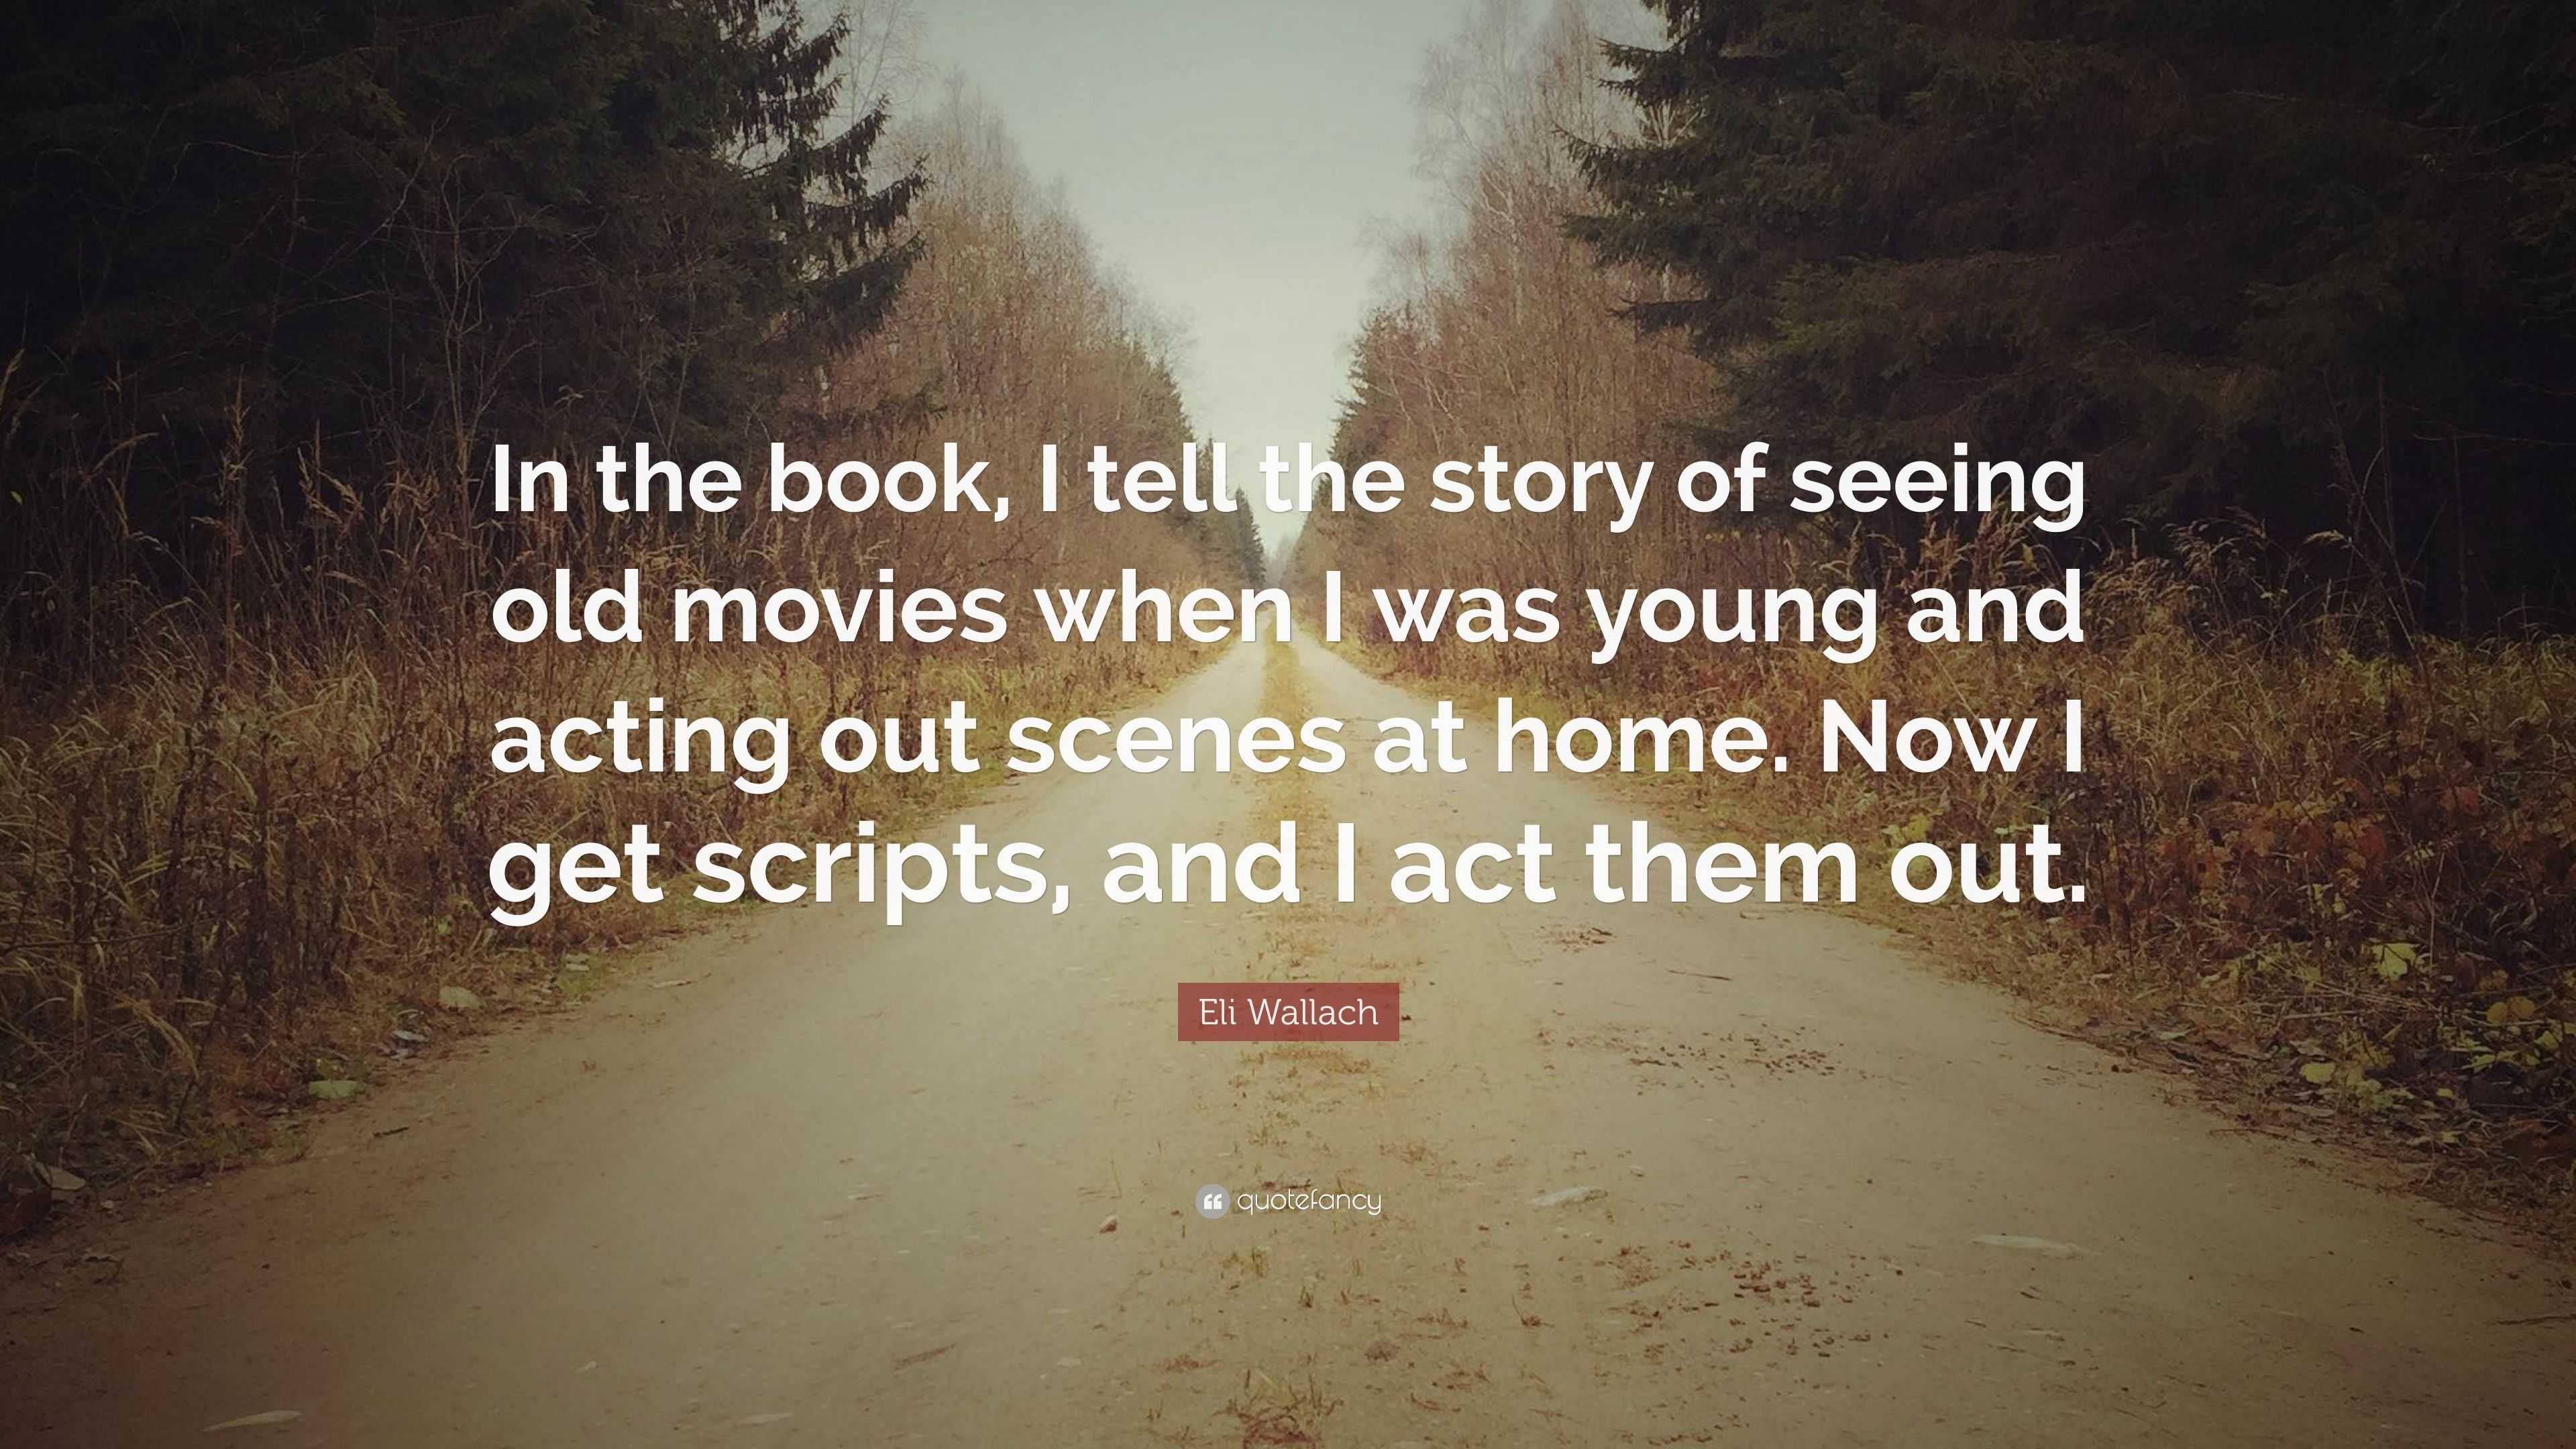 Eli Wallach Quote: "In the book, I tell the story of seeing old movies when I was young and ...